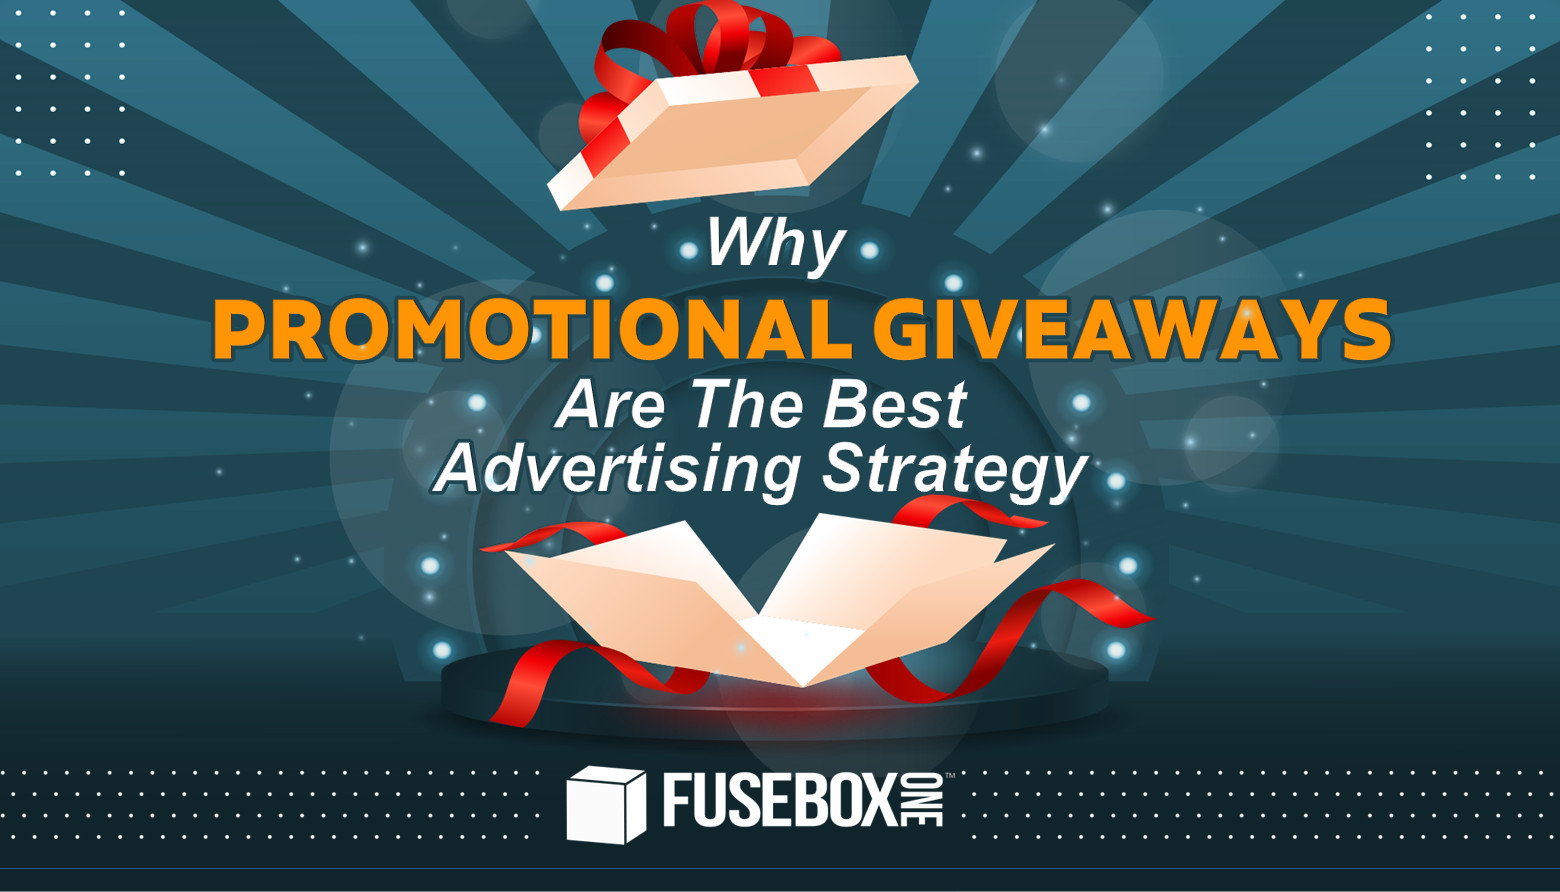 Why Promotional GiveAways Are The Best Advertising Strategy